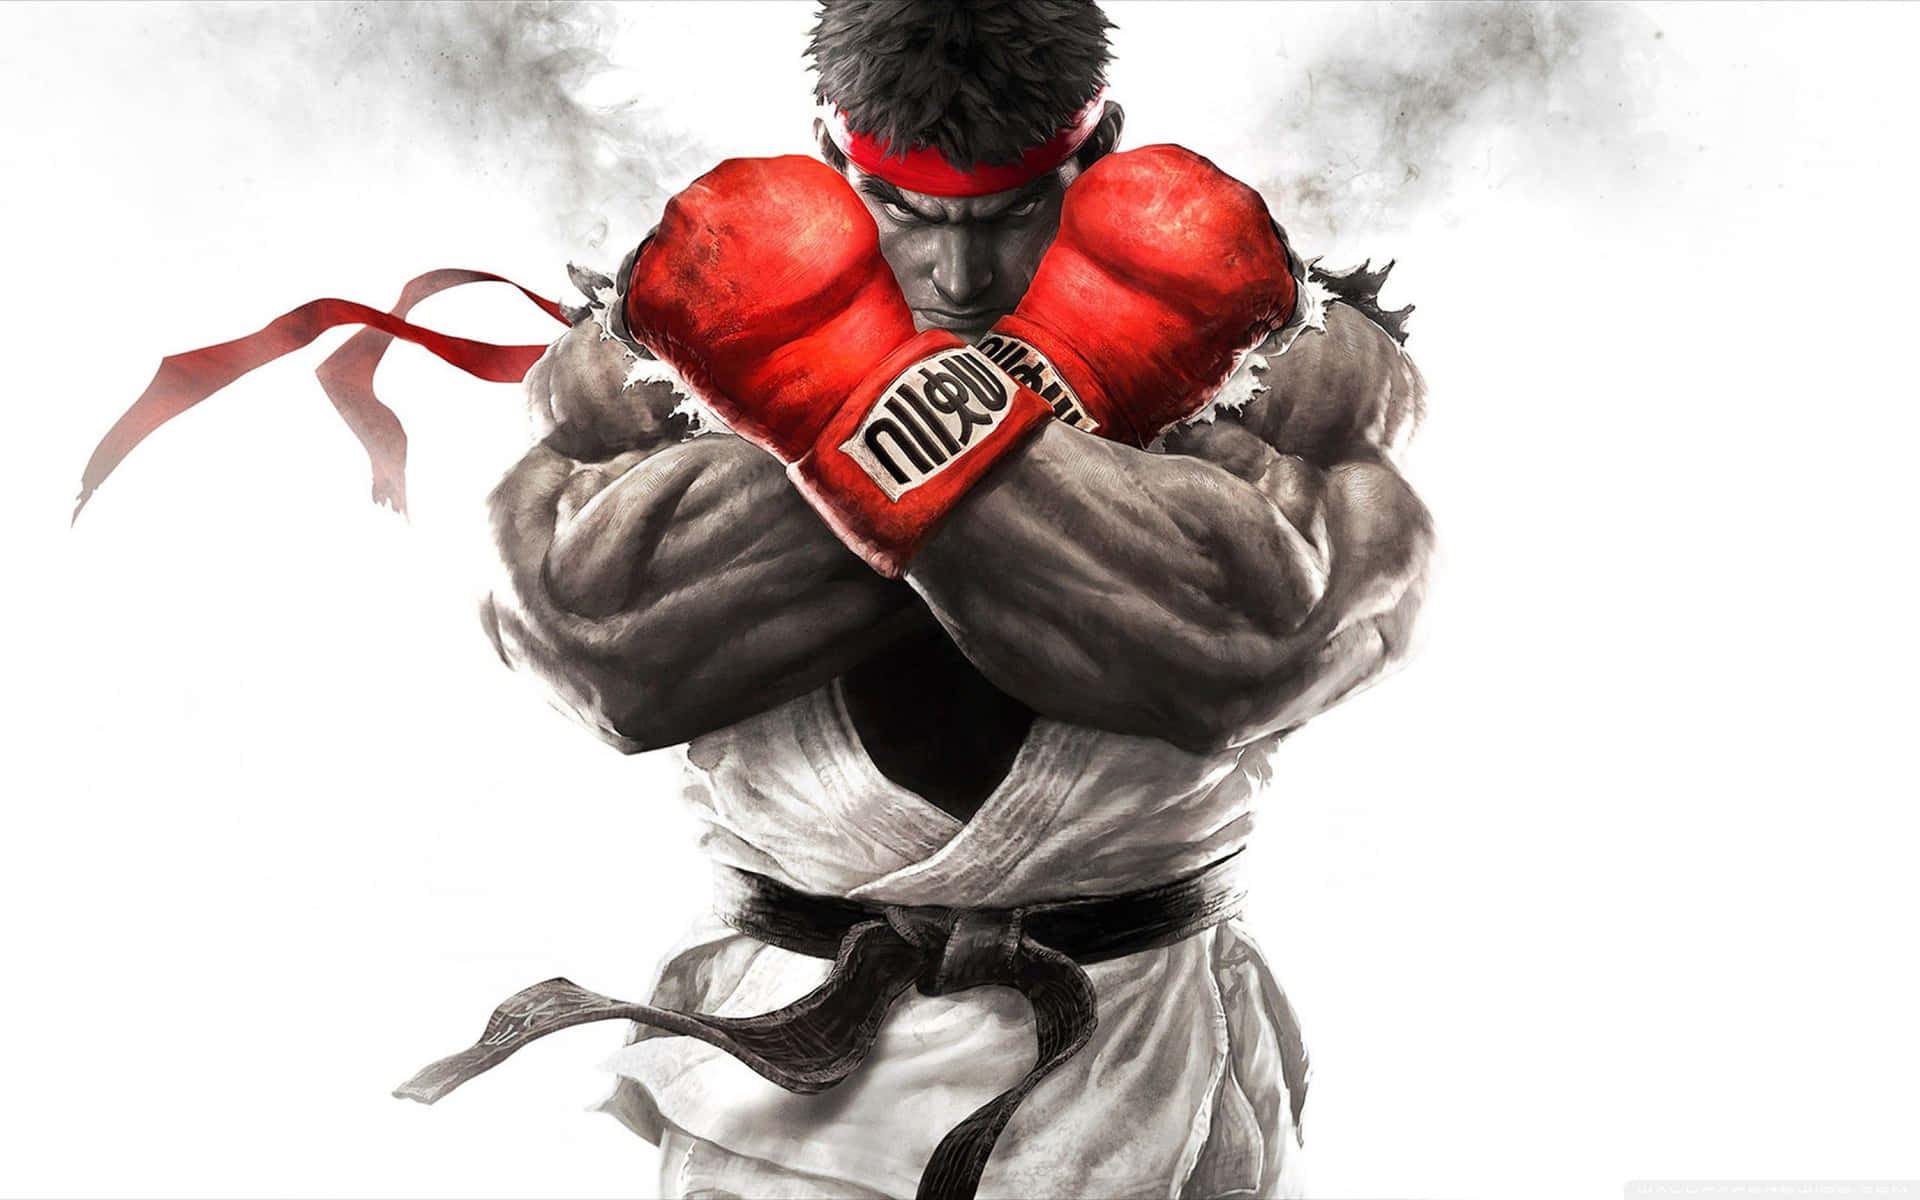 Two Worldwide Street Fighters Competing for a Victory Wallpaper